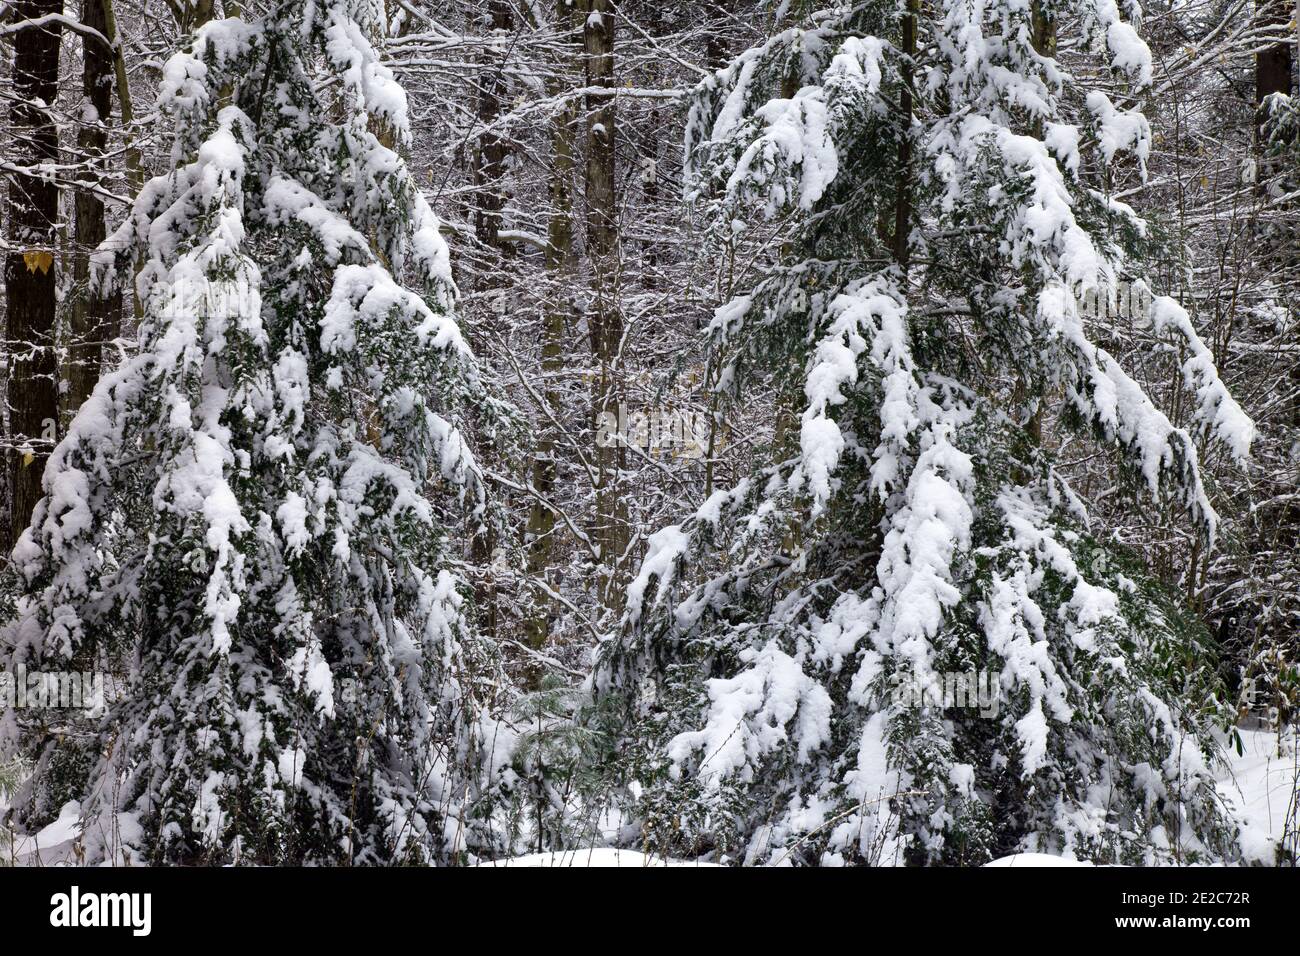 A fresh snowfall blankets the forest in the Delaware State Forest, Pennsylvania Stock Photo